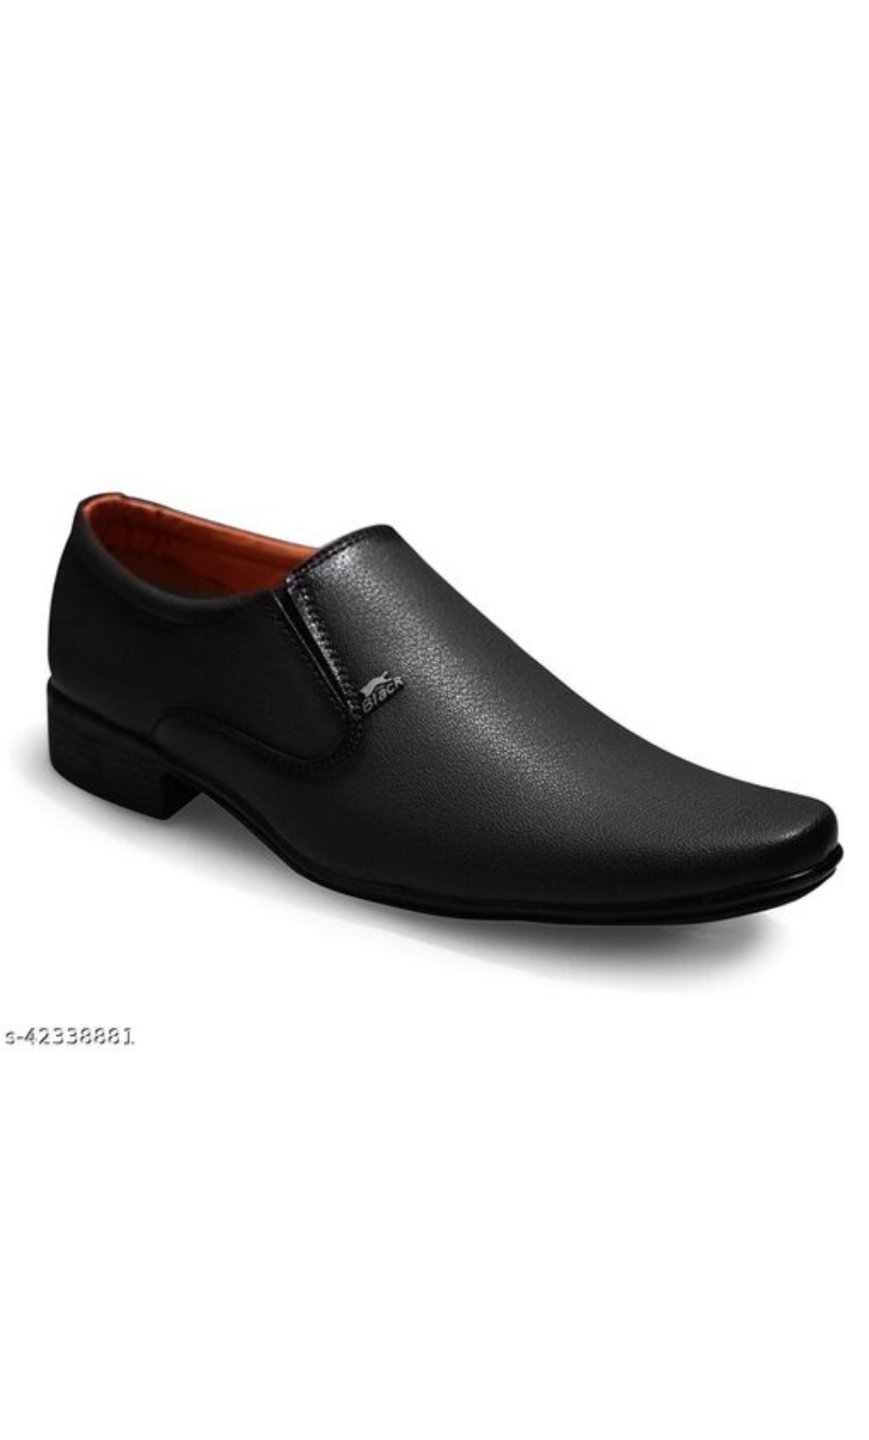 xylus loafer shoes for new style unique colour